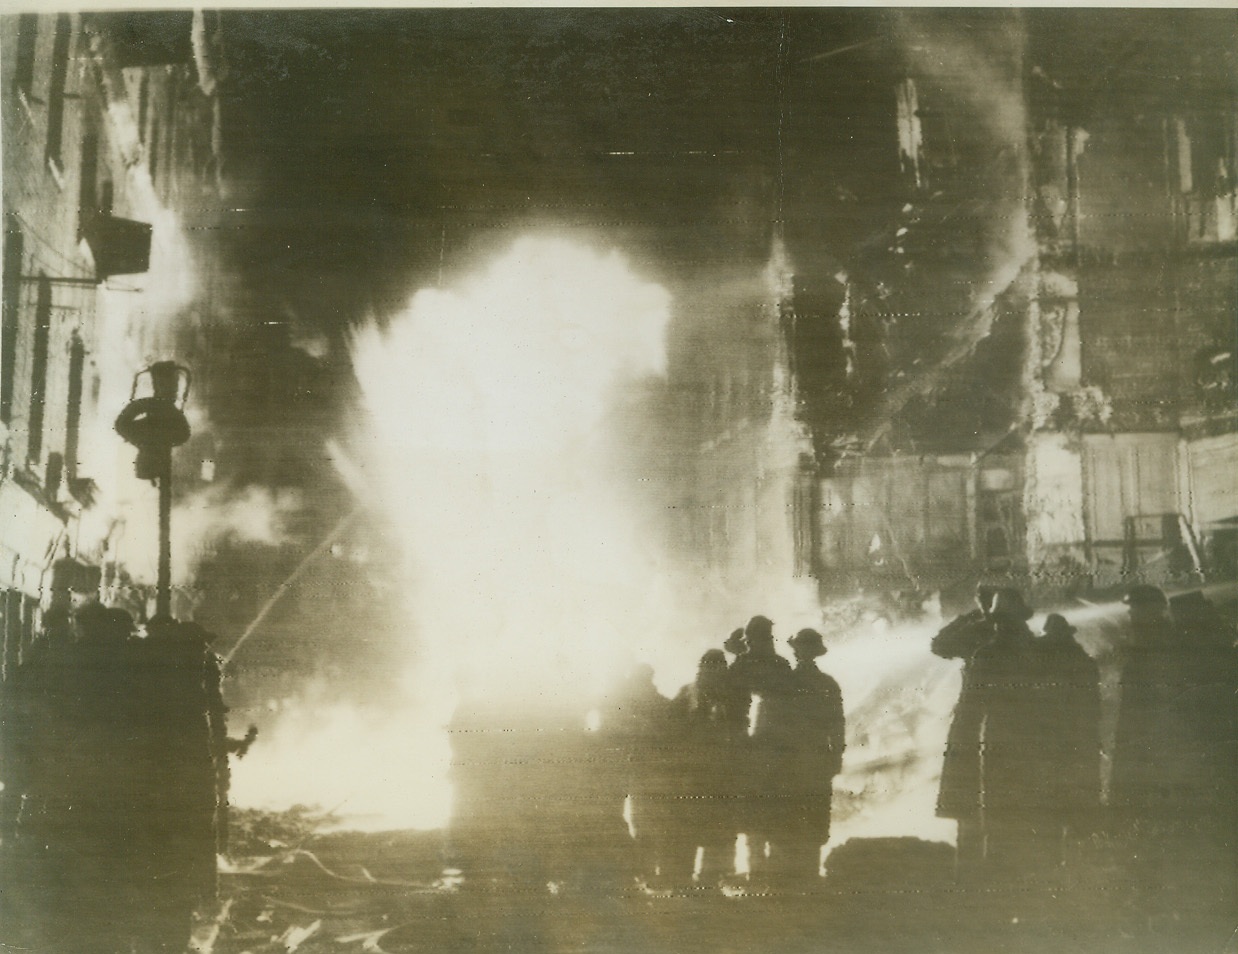 Gas Main Burns After Raid, 2/25/1944. LONDON -- British air raid wardens and fire fighters are silhouetted against the roaring flame of a burning gas main during last night's (Feb. 24th) raid on London by Hitler's bombers. In the background are bombed and burning buildings. Photo radioed to New York today from London. Credit: (ACME Radiophoto);